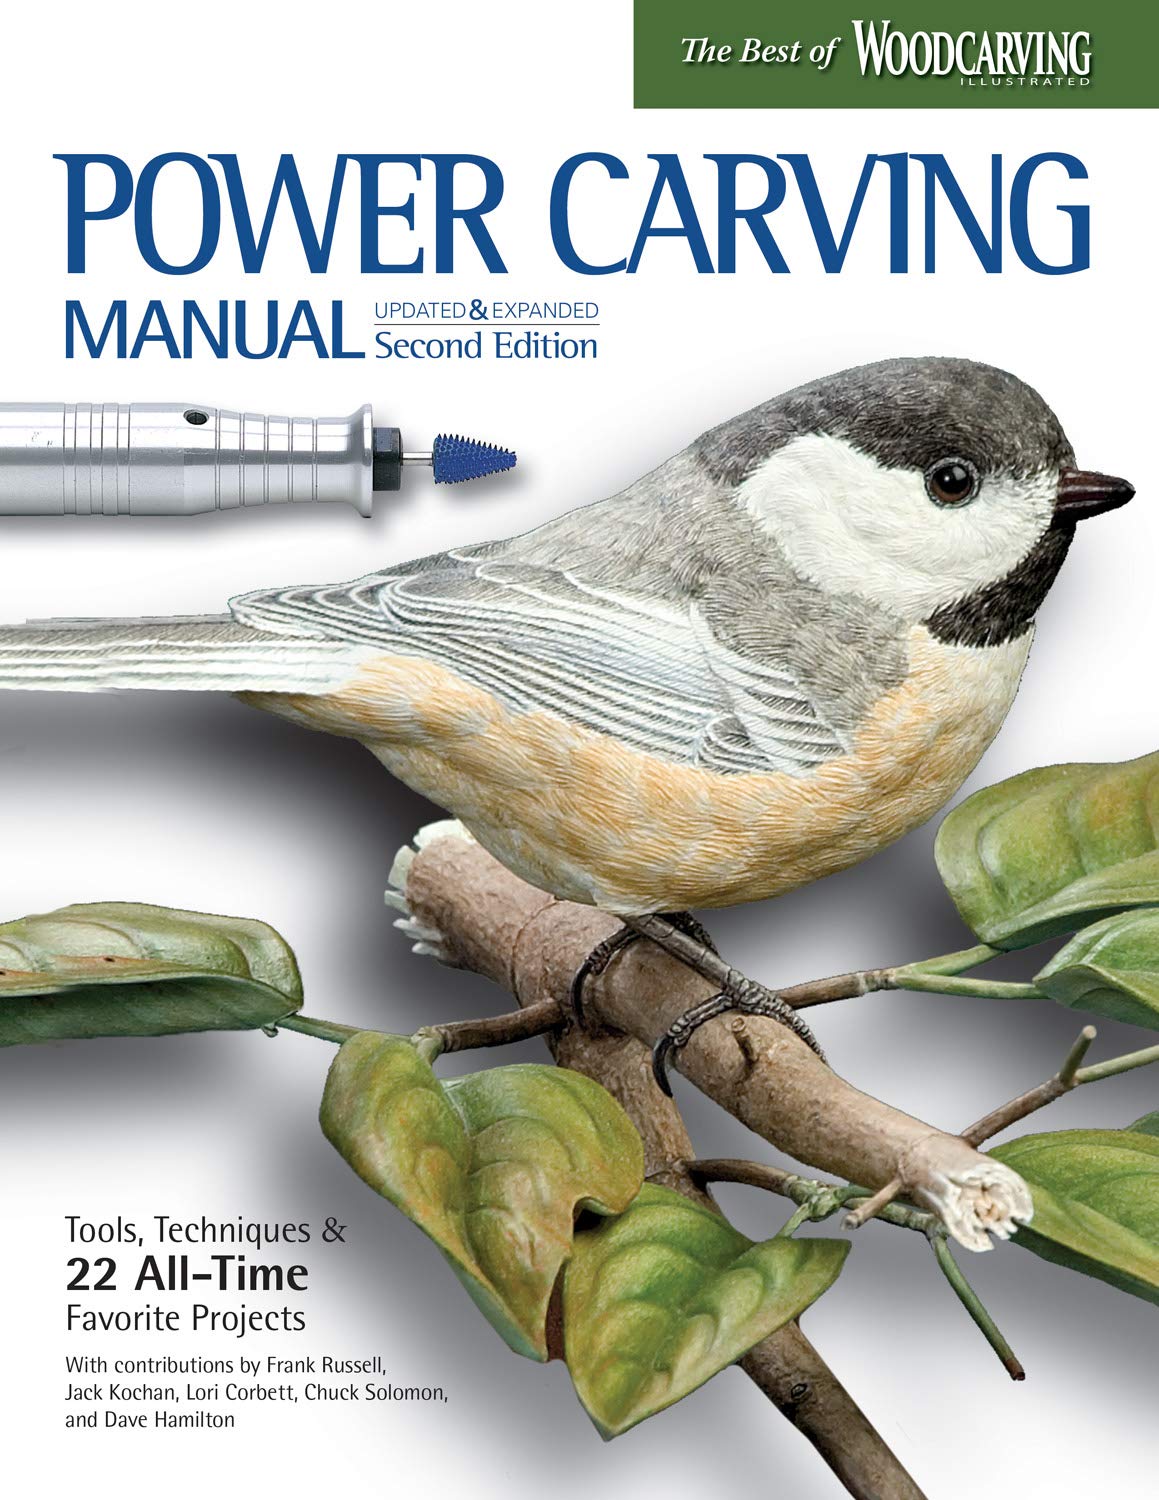 Power Carving Manual, Second Edition: Tools, Techniques, and 22 All-Time Favorite Projects (Fox Chapel Publishing) Step-by-Step Projects and Photos,